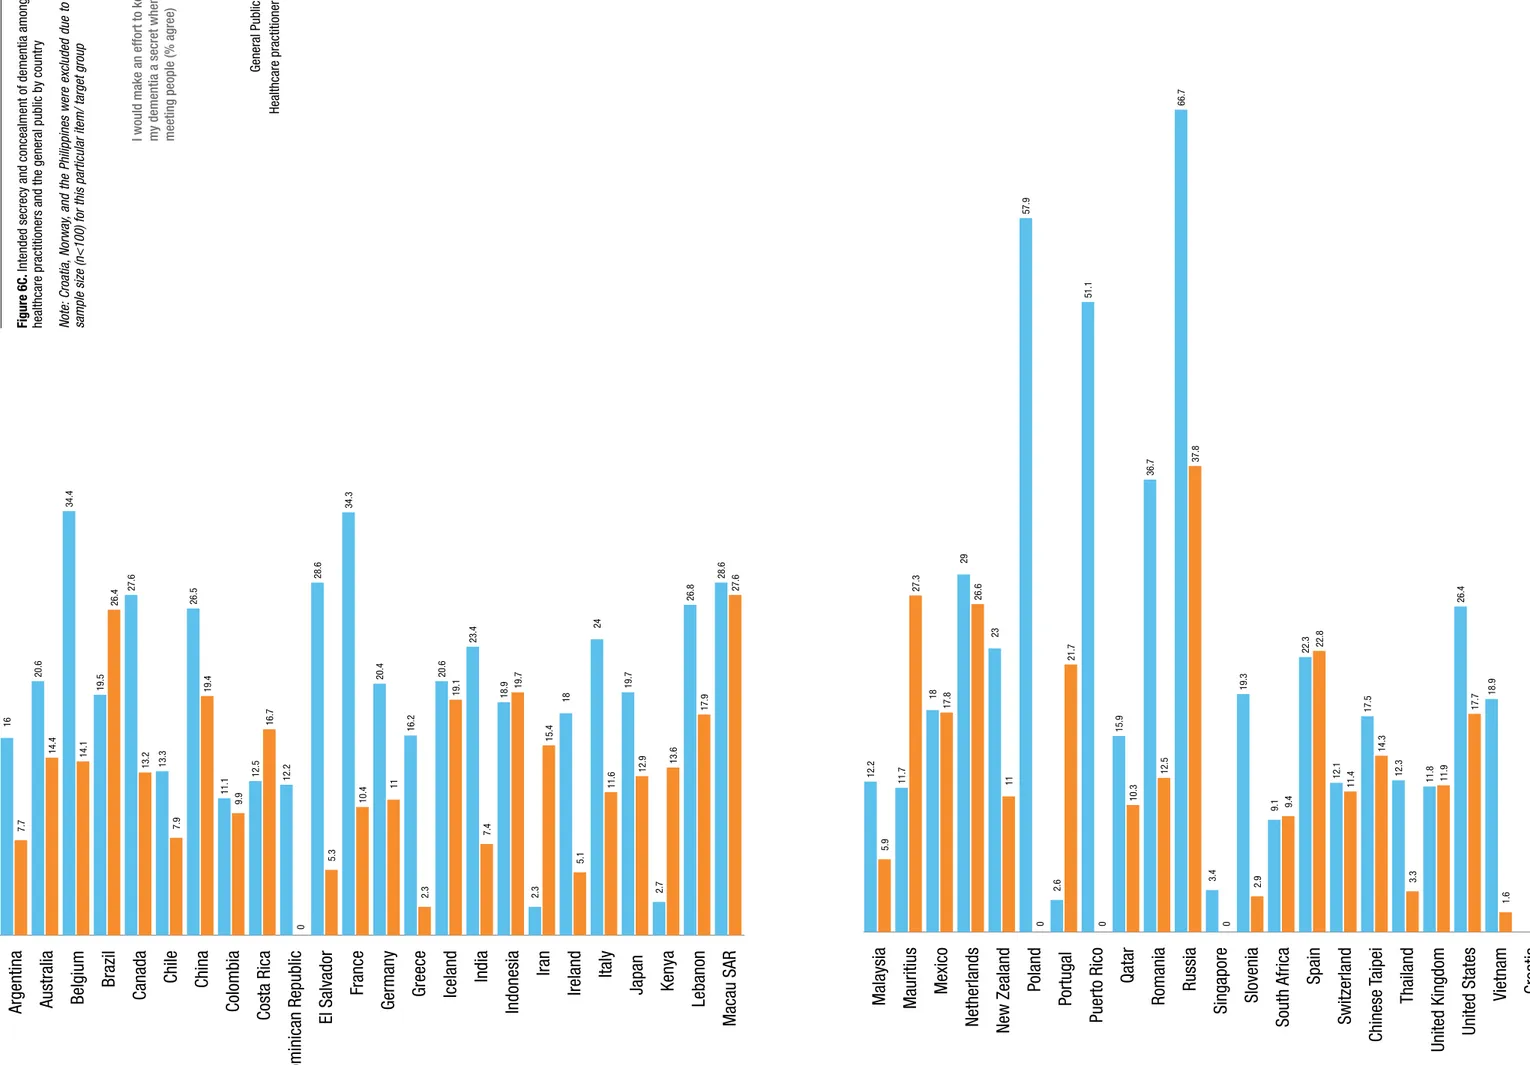 Figure 6C. Intended secrecy and concealment of dementia among  healthcare practitioners and the general public by country Note: Croatia, Norway, and the Philippines were excluded due to low  sample size (n&lt;100) for this particular item/ target group I w